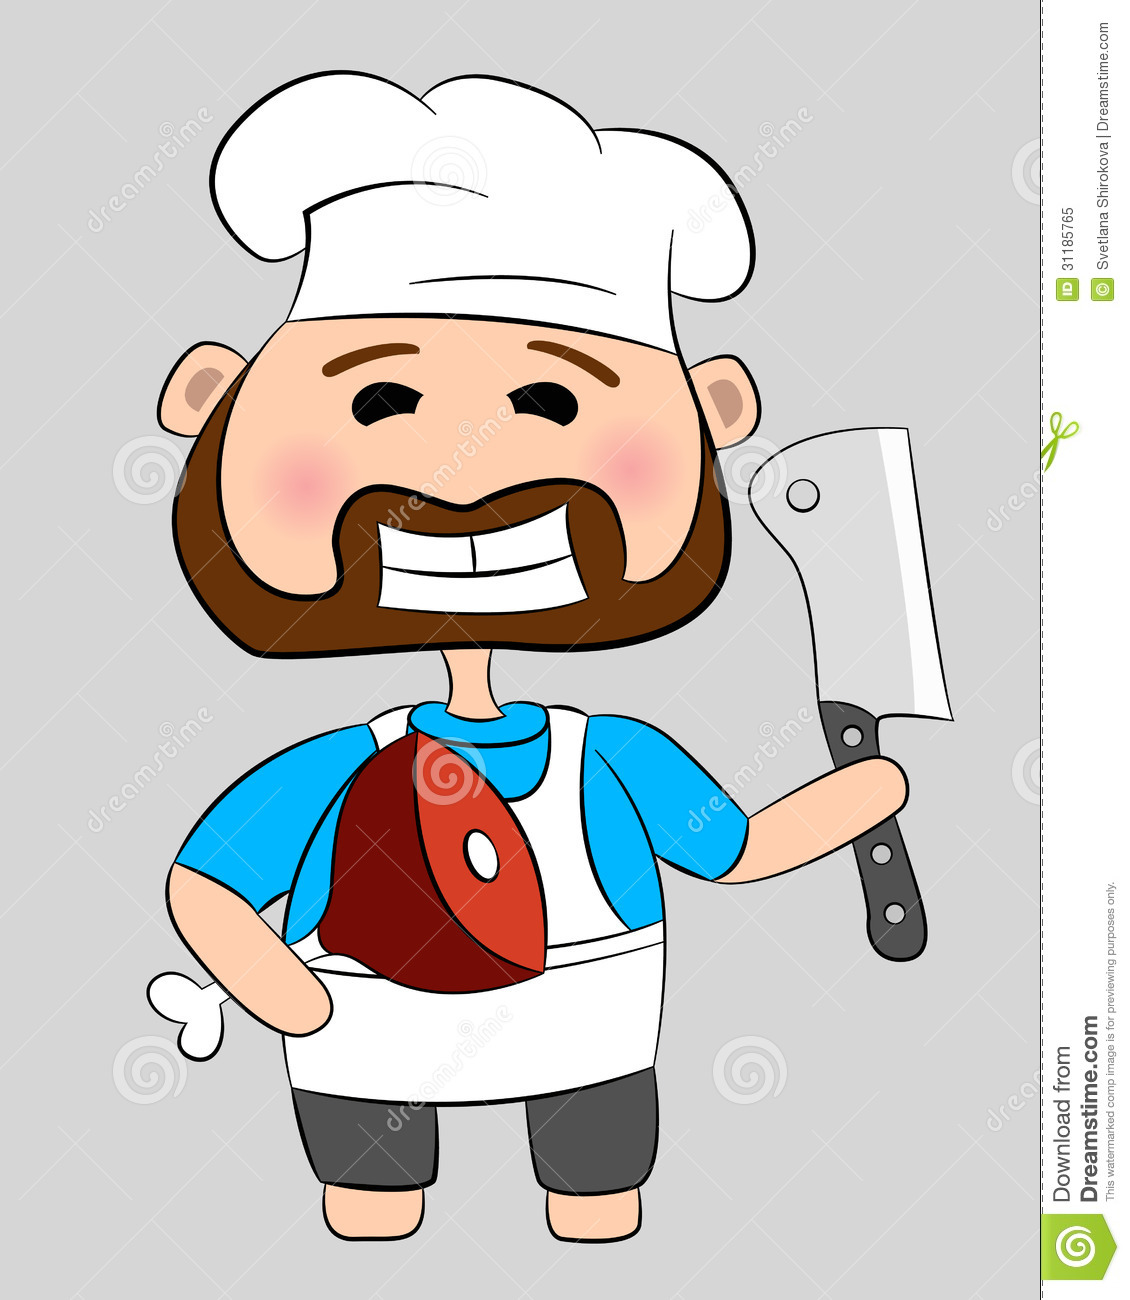 Butcher With Knife And Meat Royalty Free Stock Photo   Image  31185765